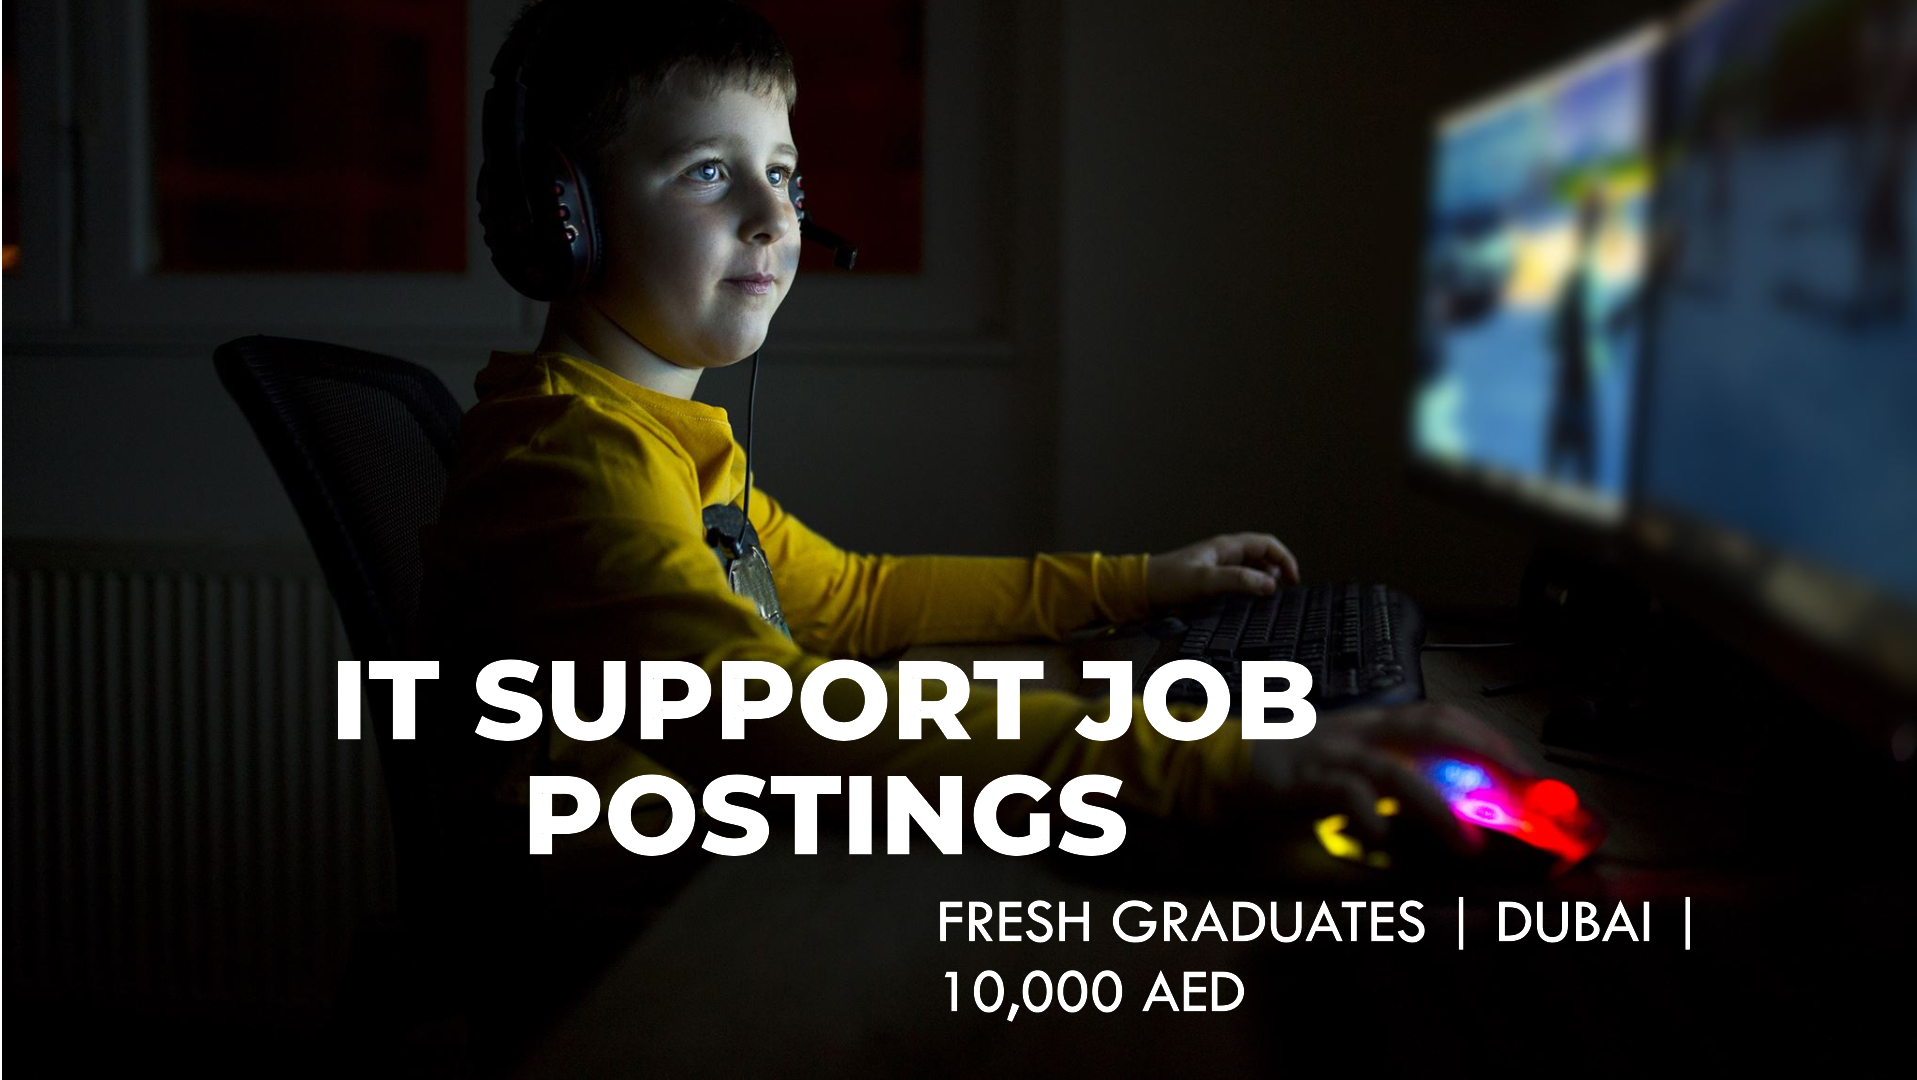 IT Support jobs in Dubai with salary 10,000 AED (Fresh Graduate)